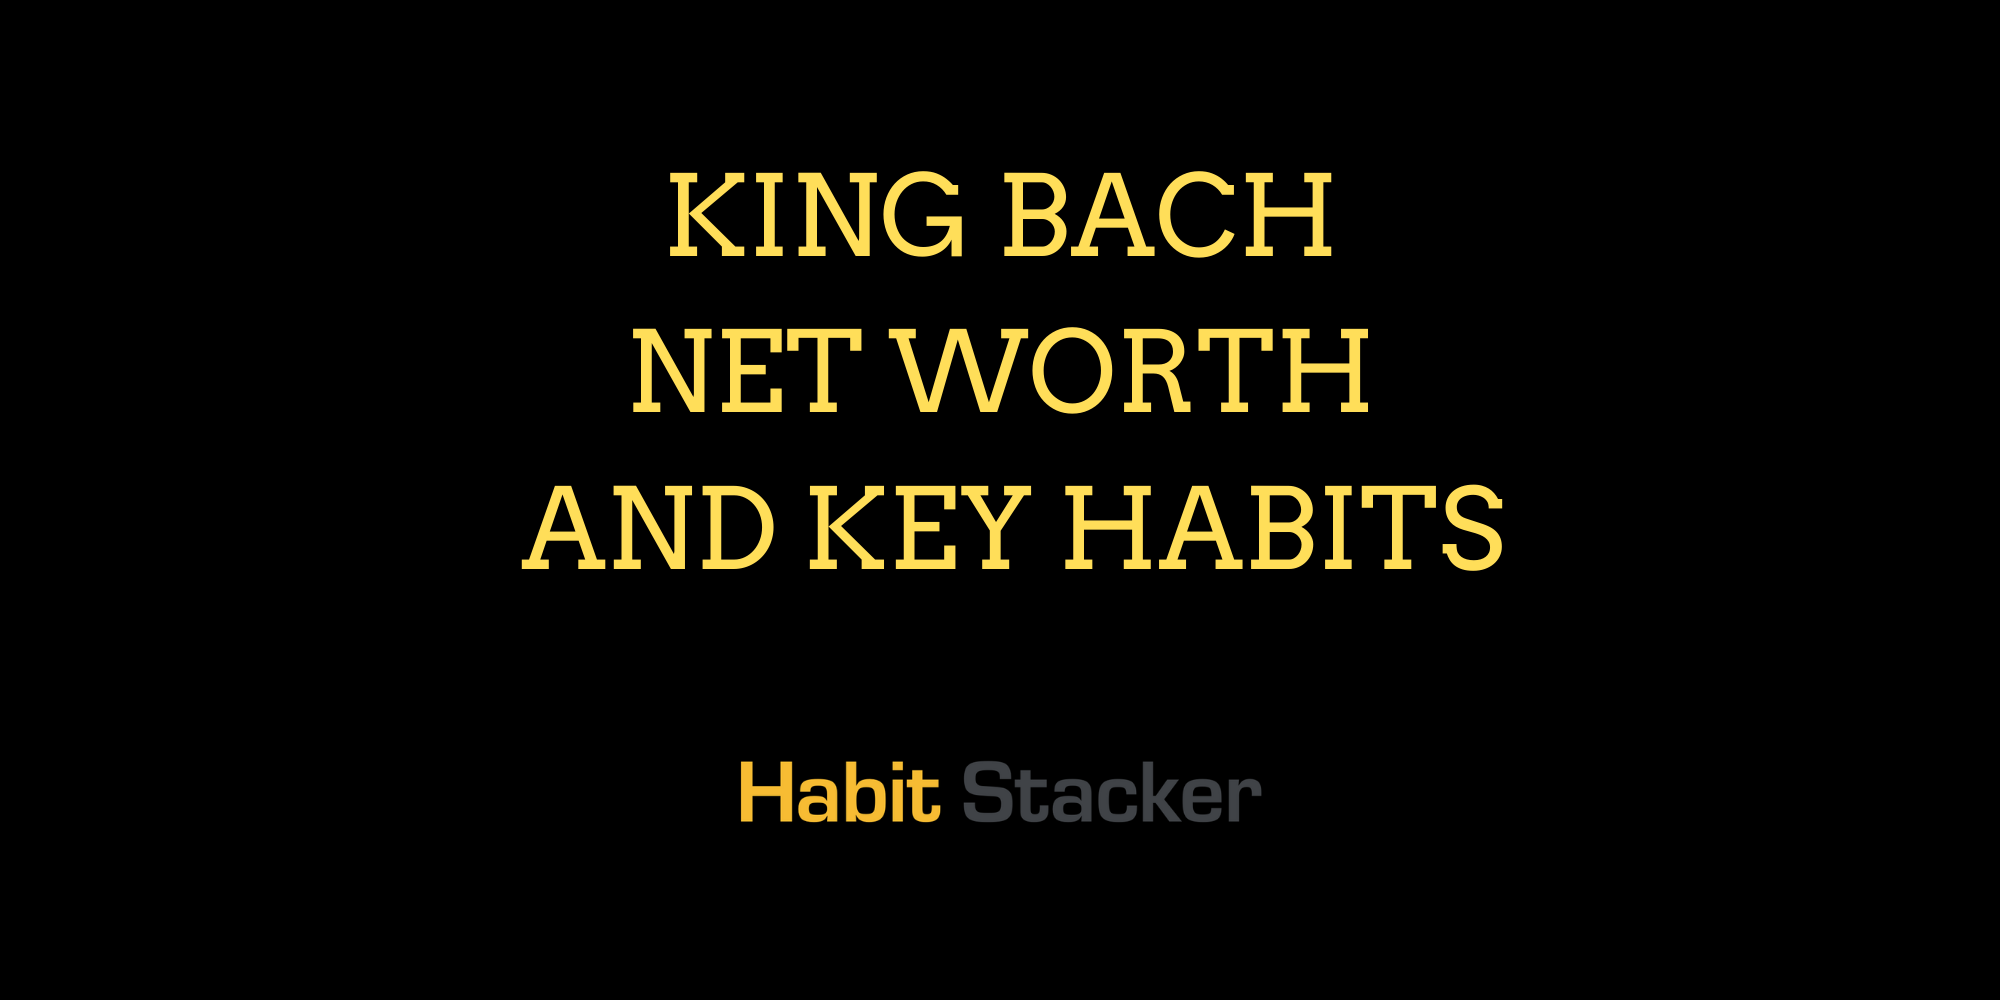 King Bach Net Worth and Key Habits